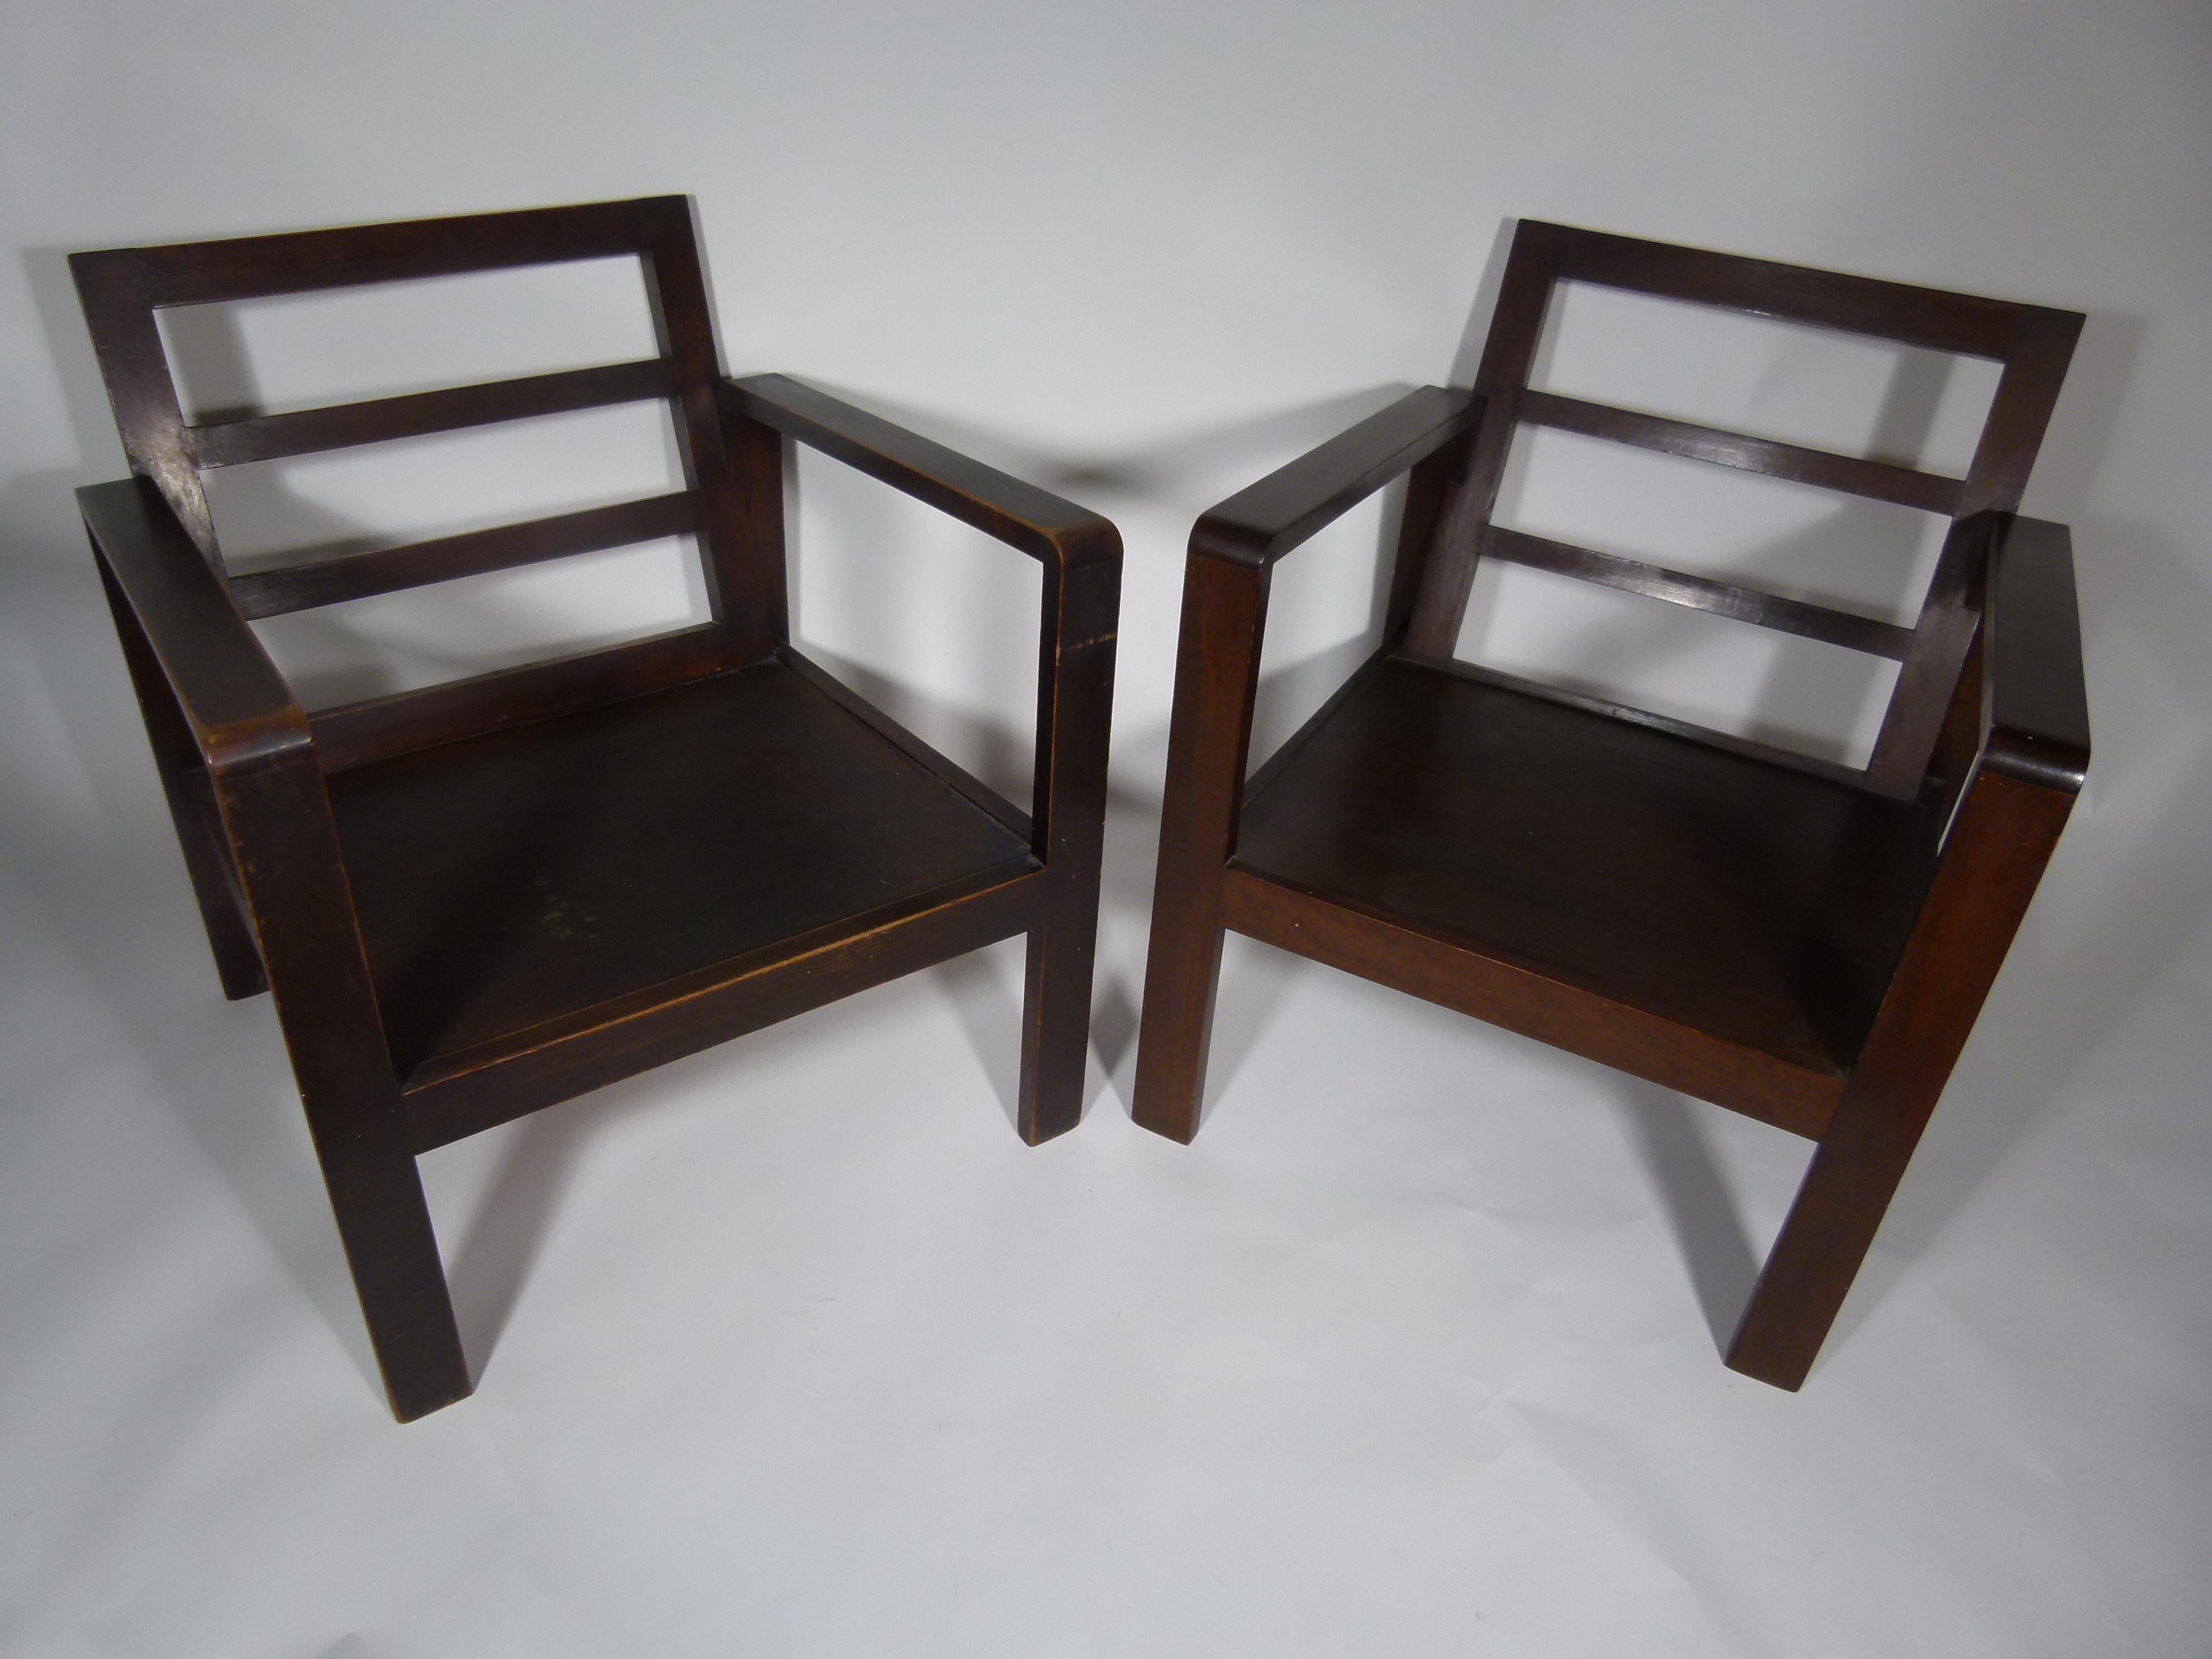 Midcentury pair of walnut armchairs from Spain. The clean lines and Minimalist and gentle design of the chairs are typically from the 1950s. A style that is idolized even today.